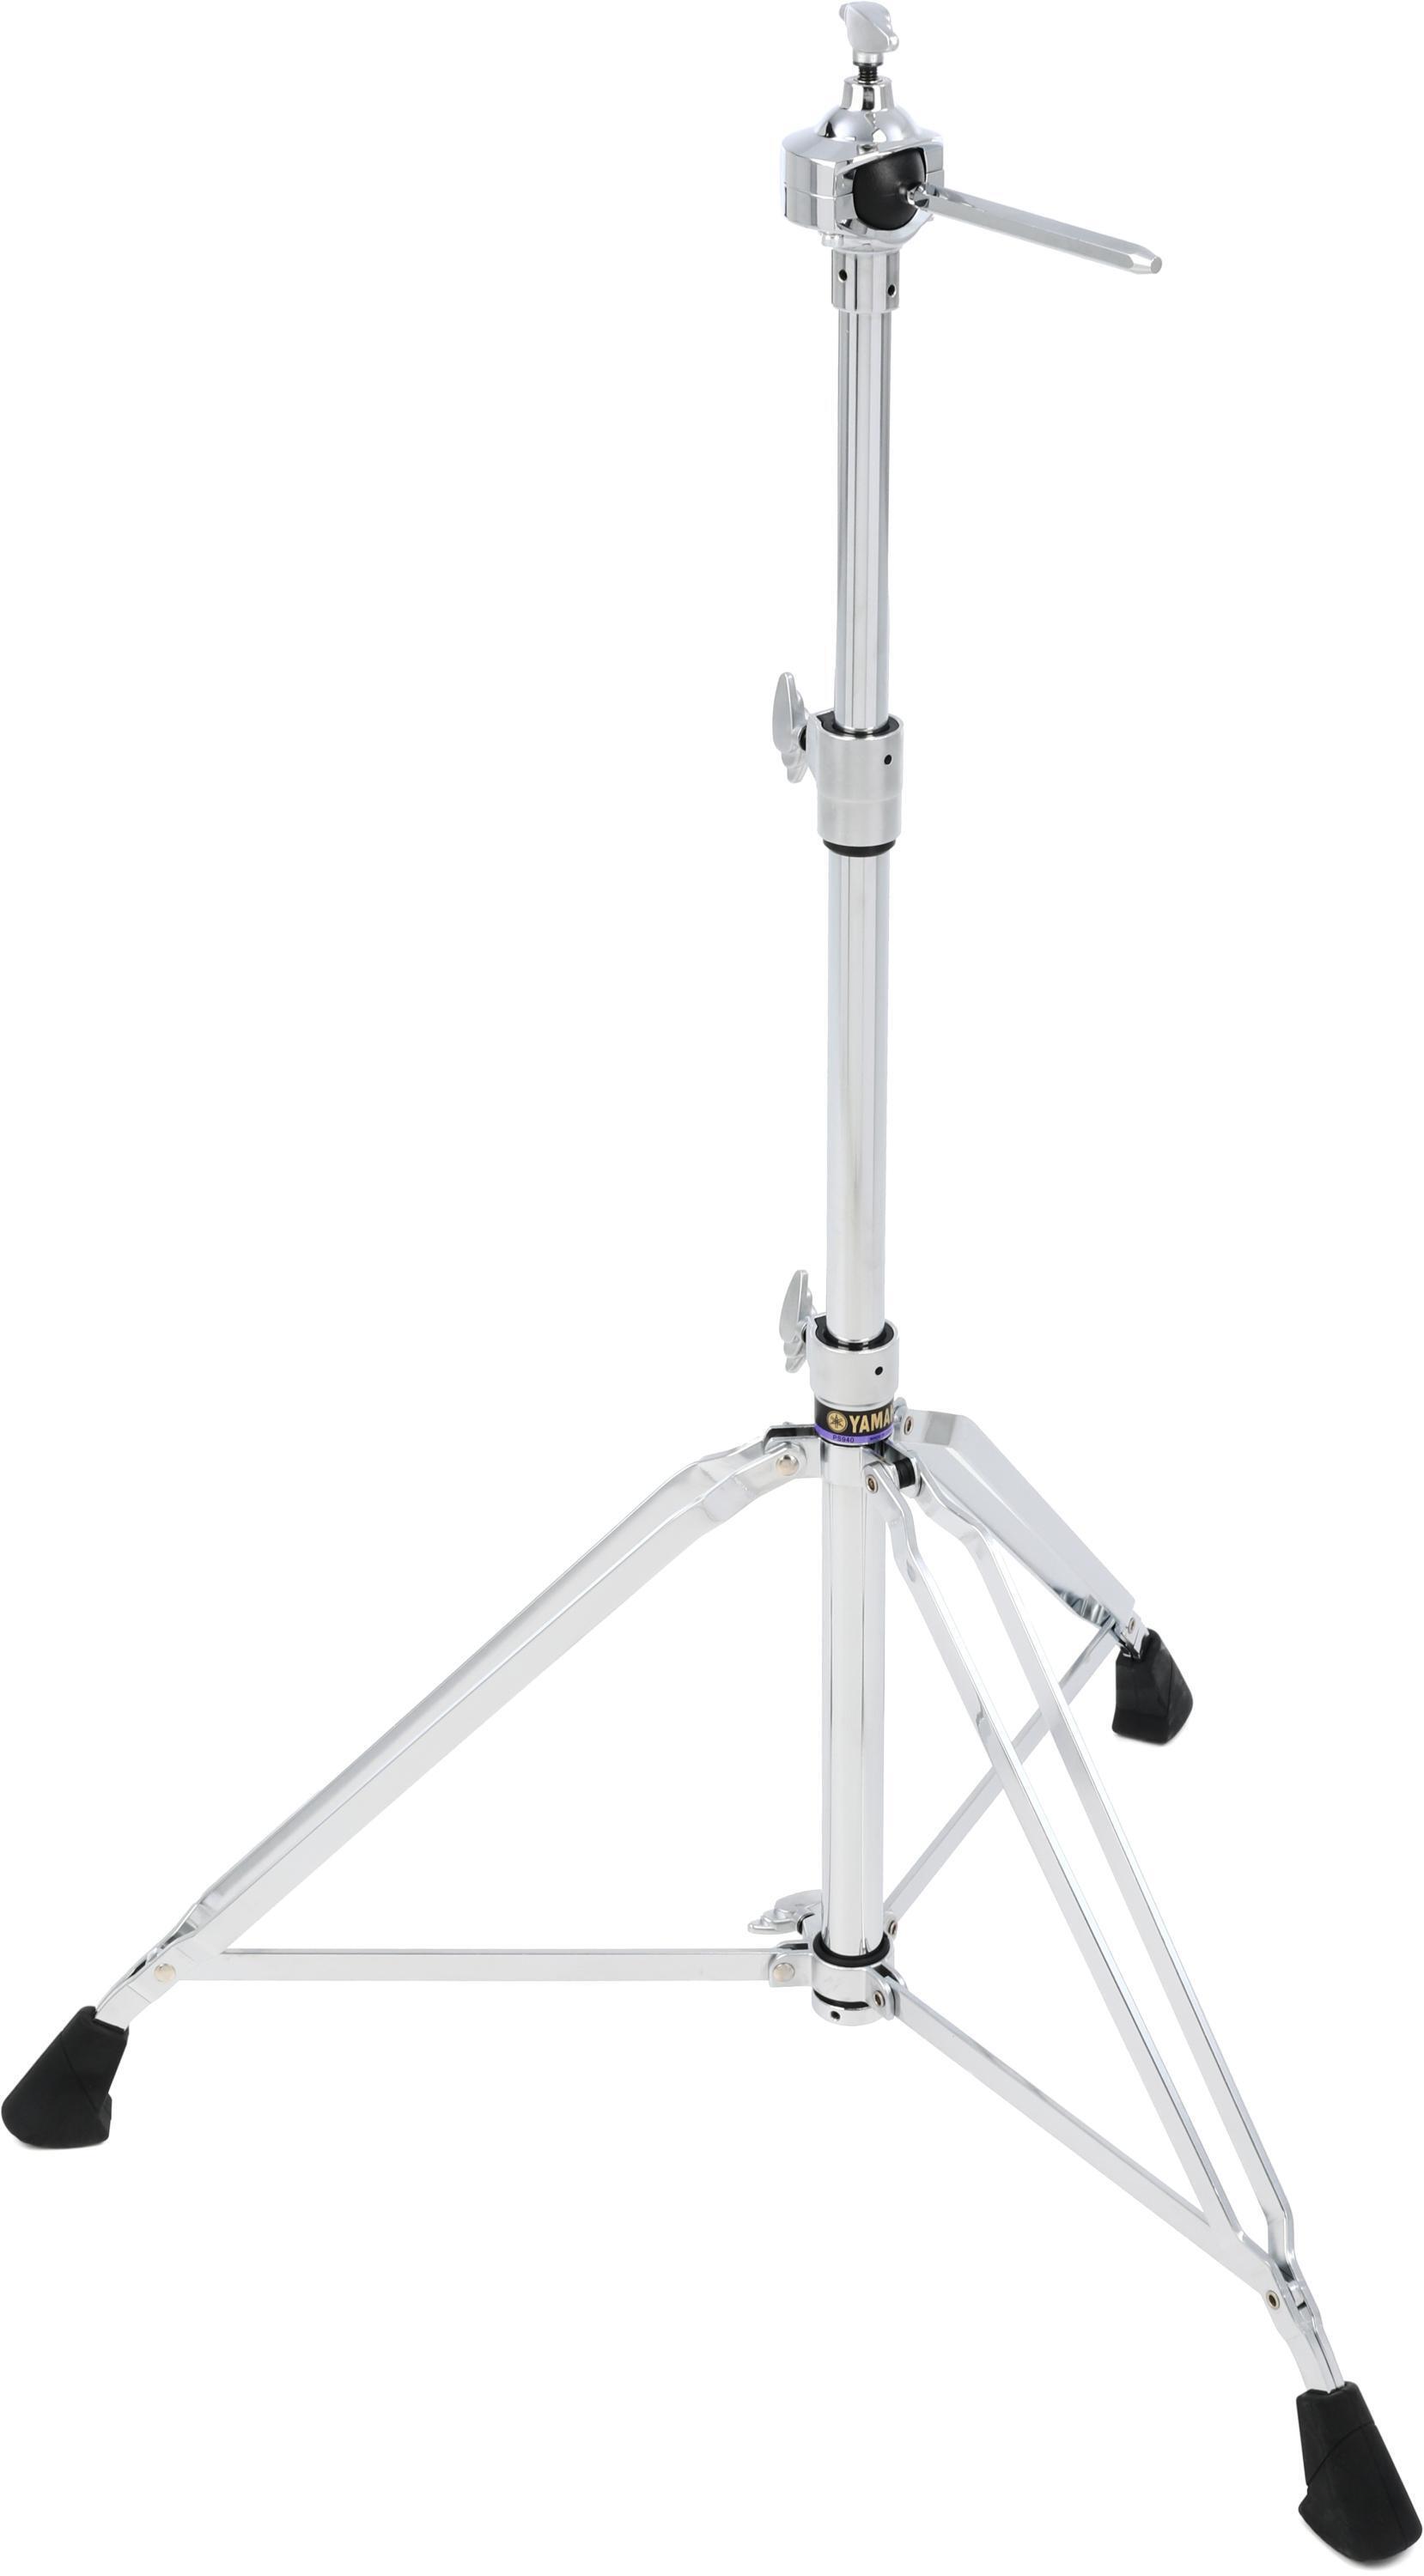 Gibraltar 6713E 6700 Series Electronics Mounting Stand | Sweetwater